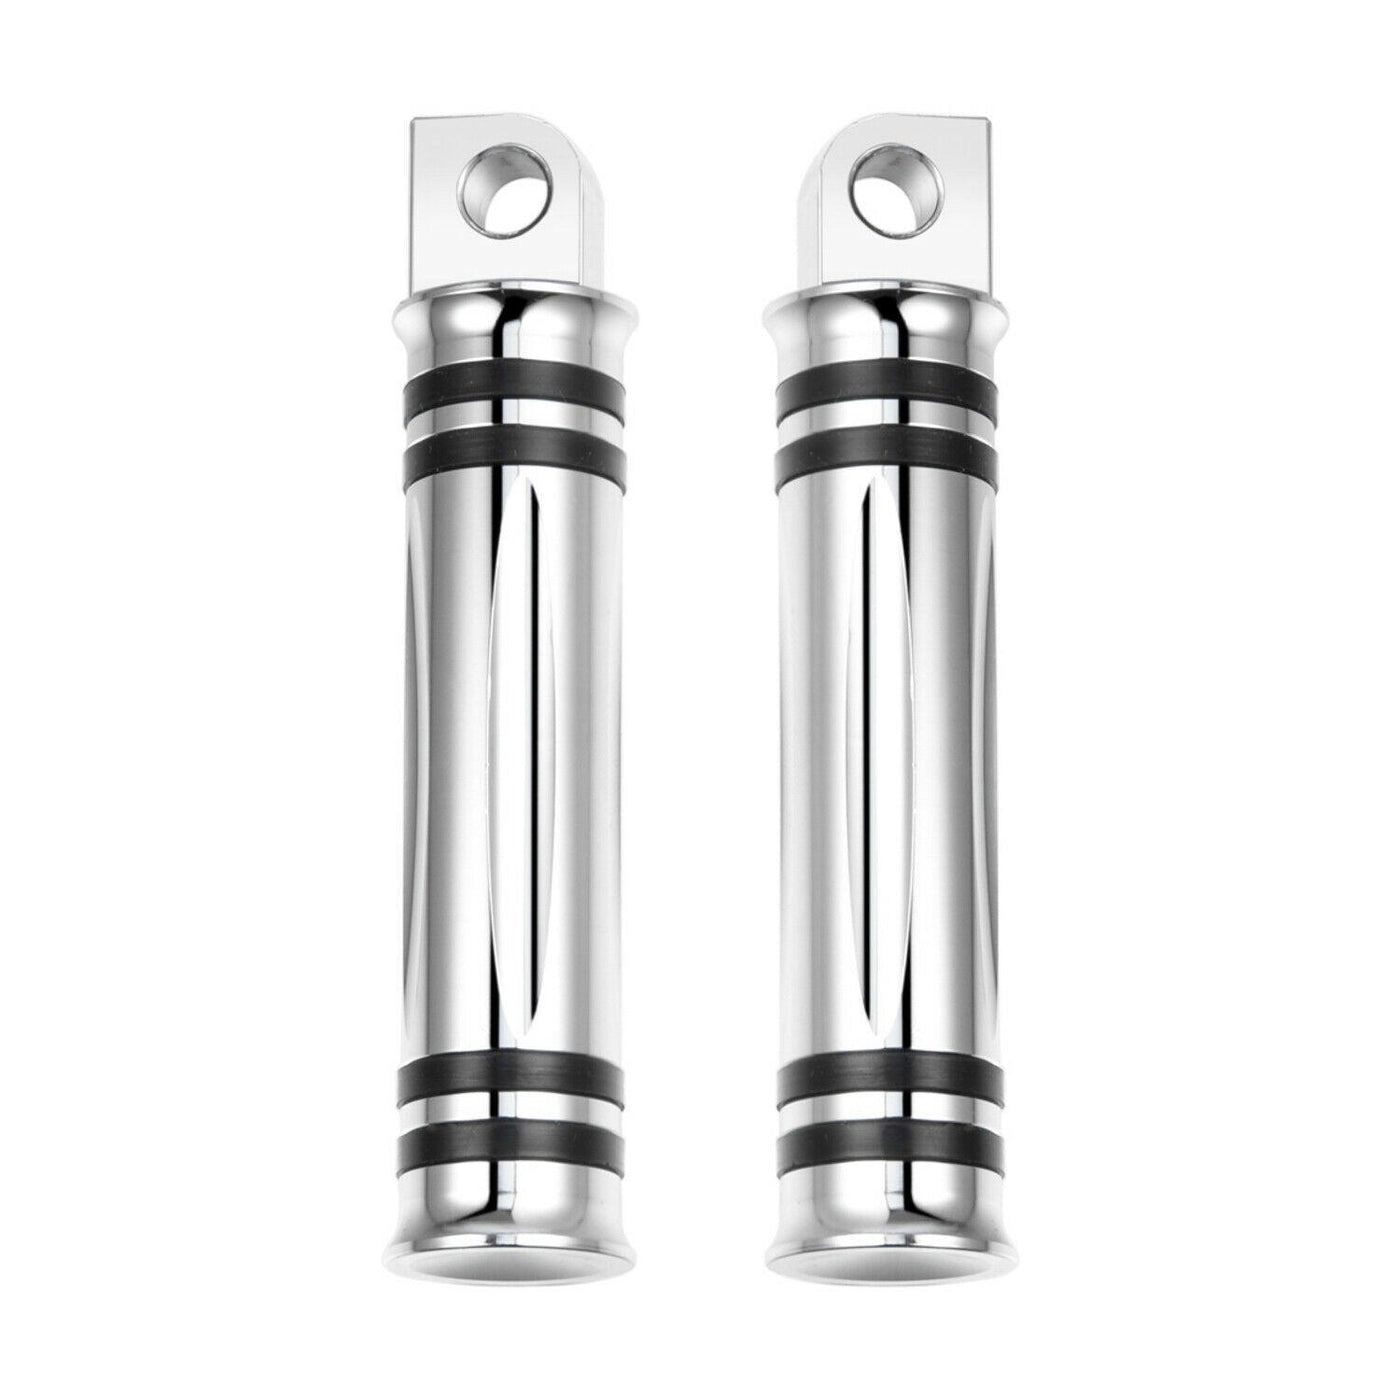 Chrome Foot Pegs Passenger Footrest Rear Fit for Harley Touring Road King Glide - Moto Life Products